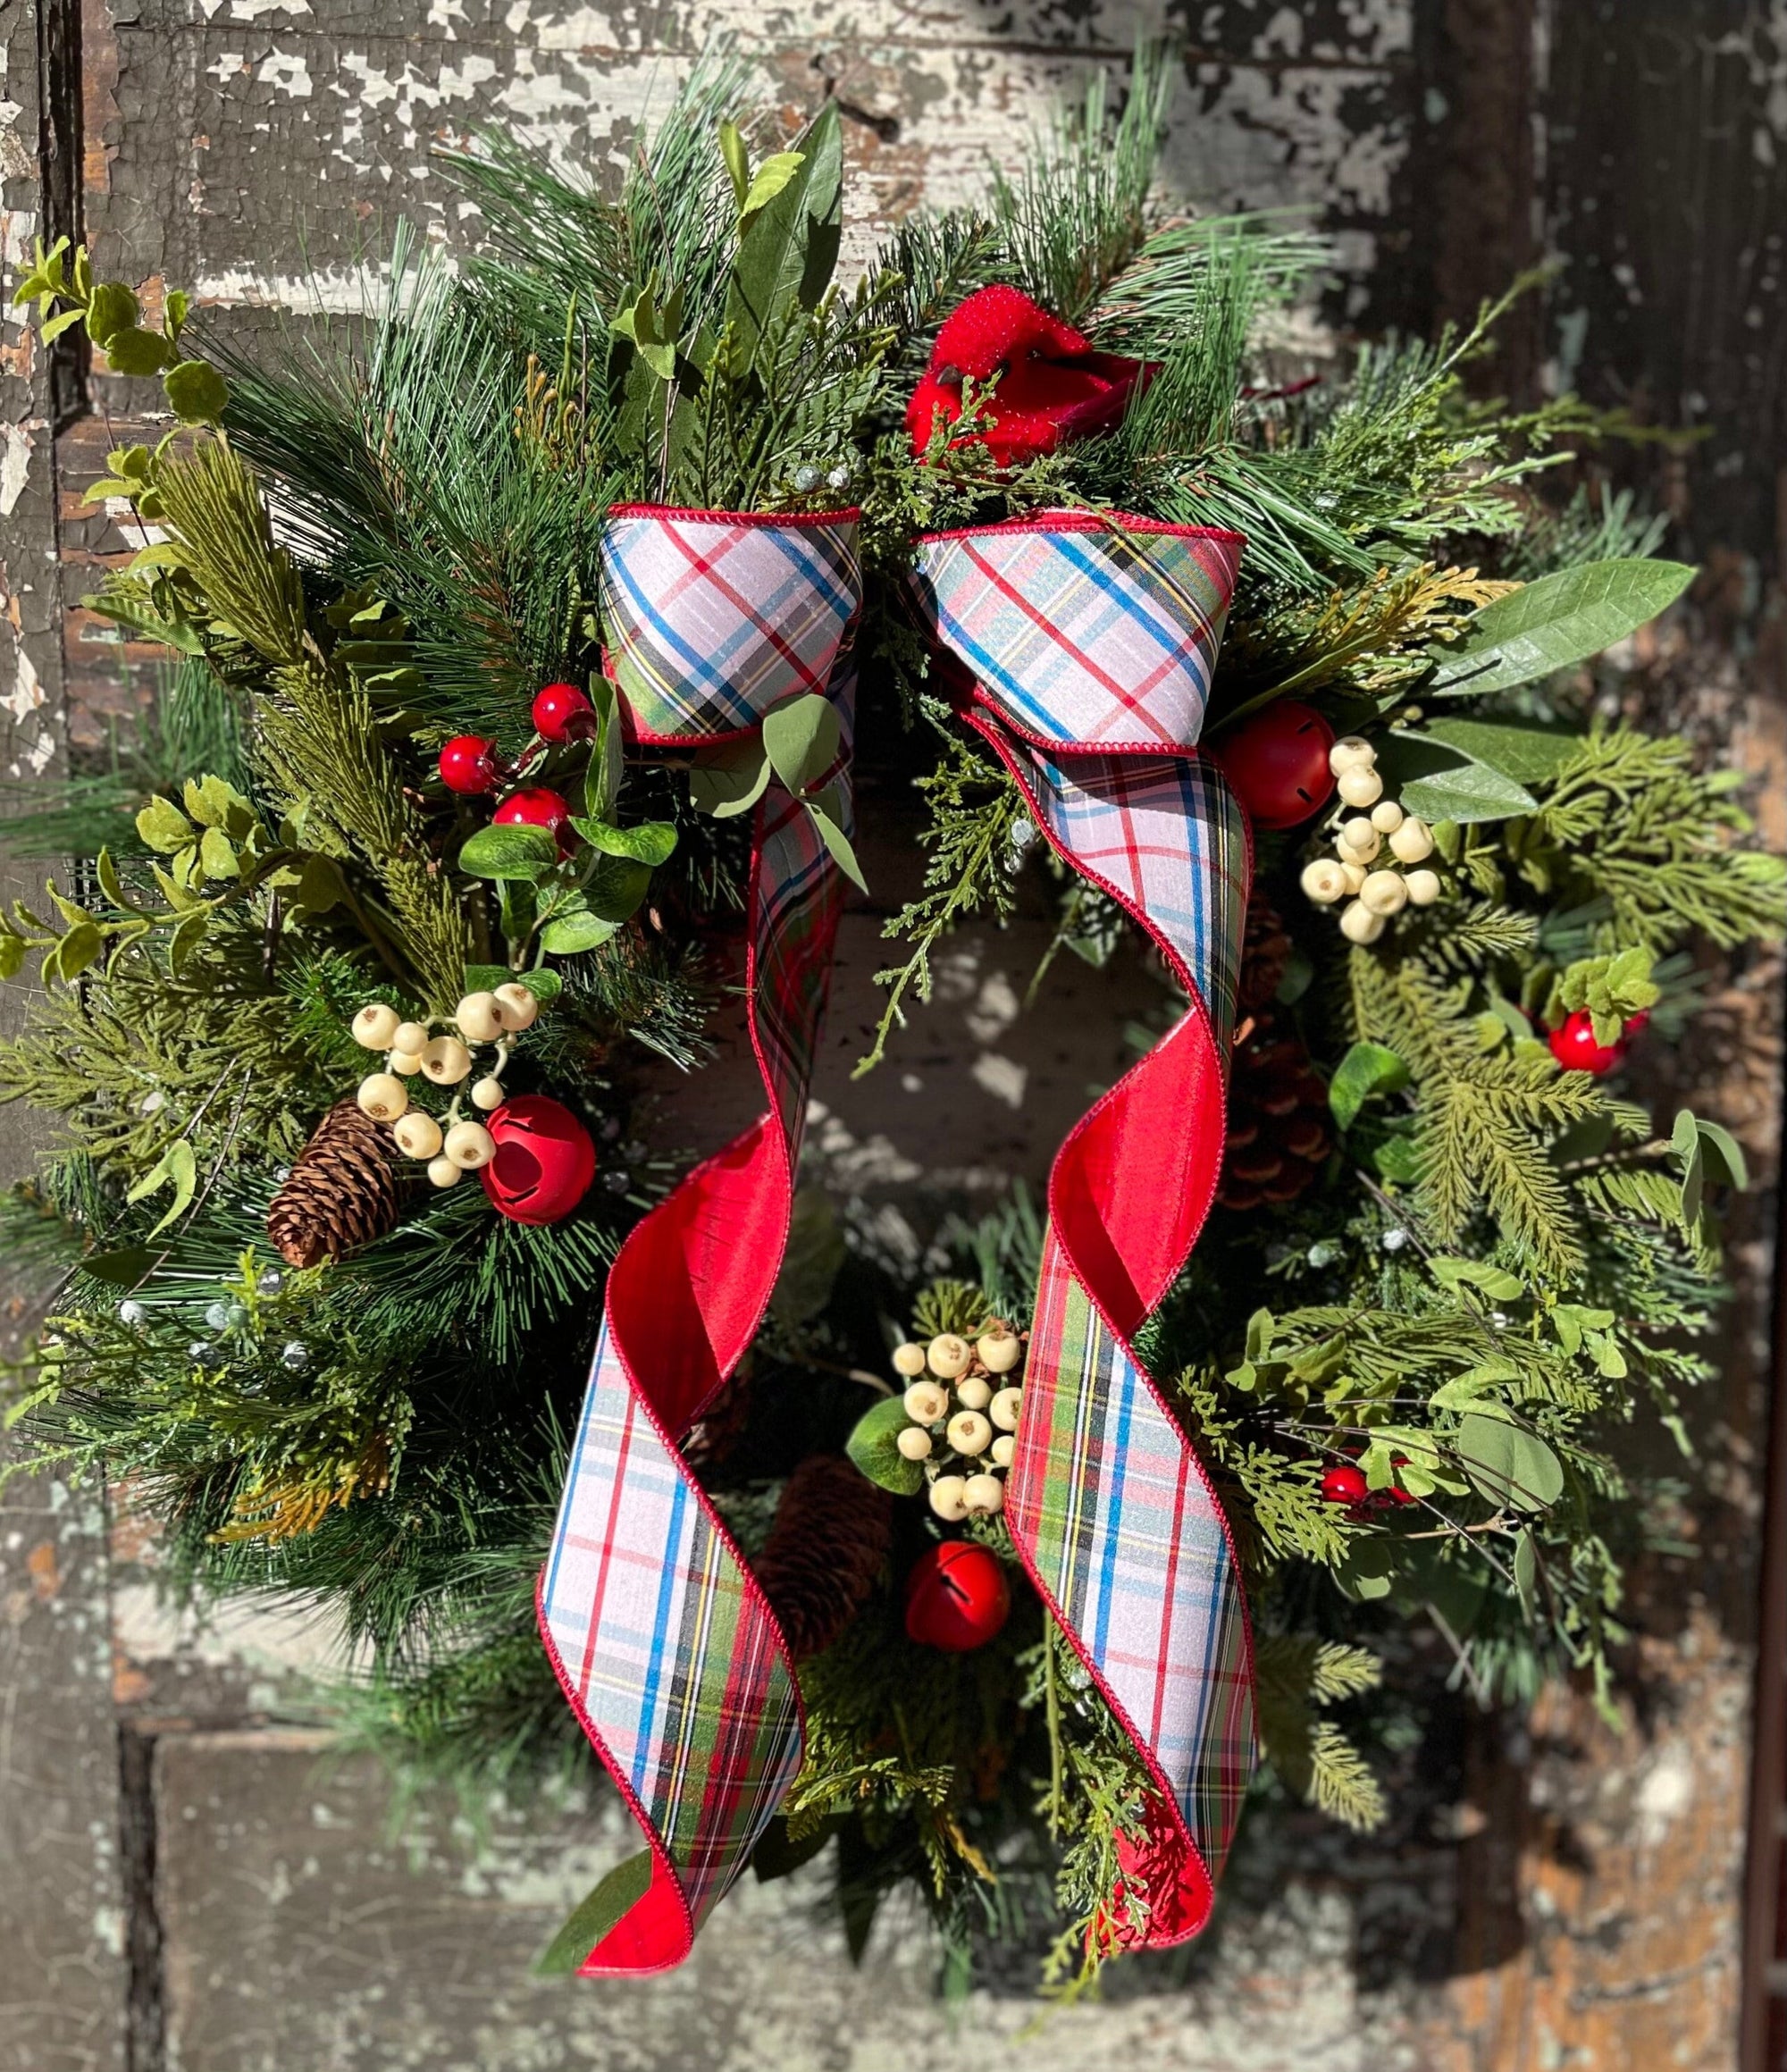 The Mary Winter Rustic Red & White Evergreen Christmas Wreath For Front Door